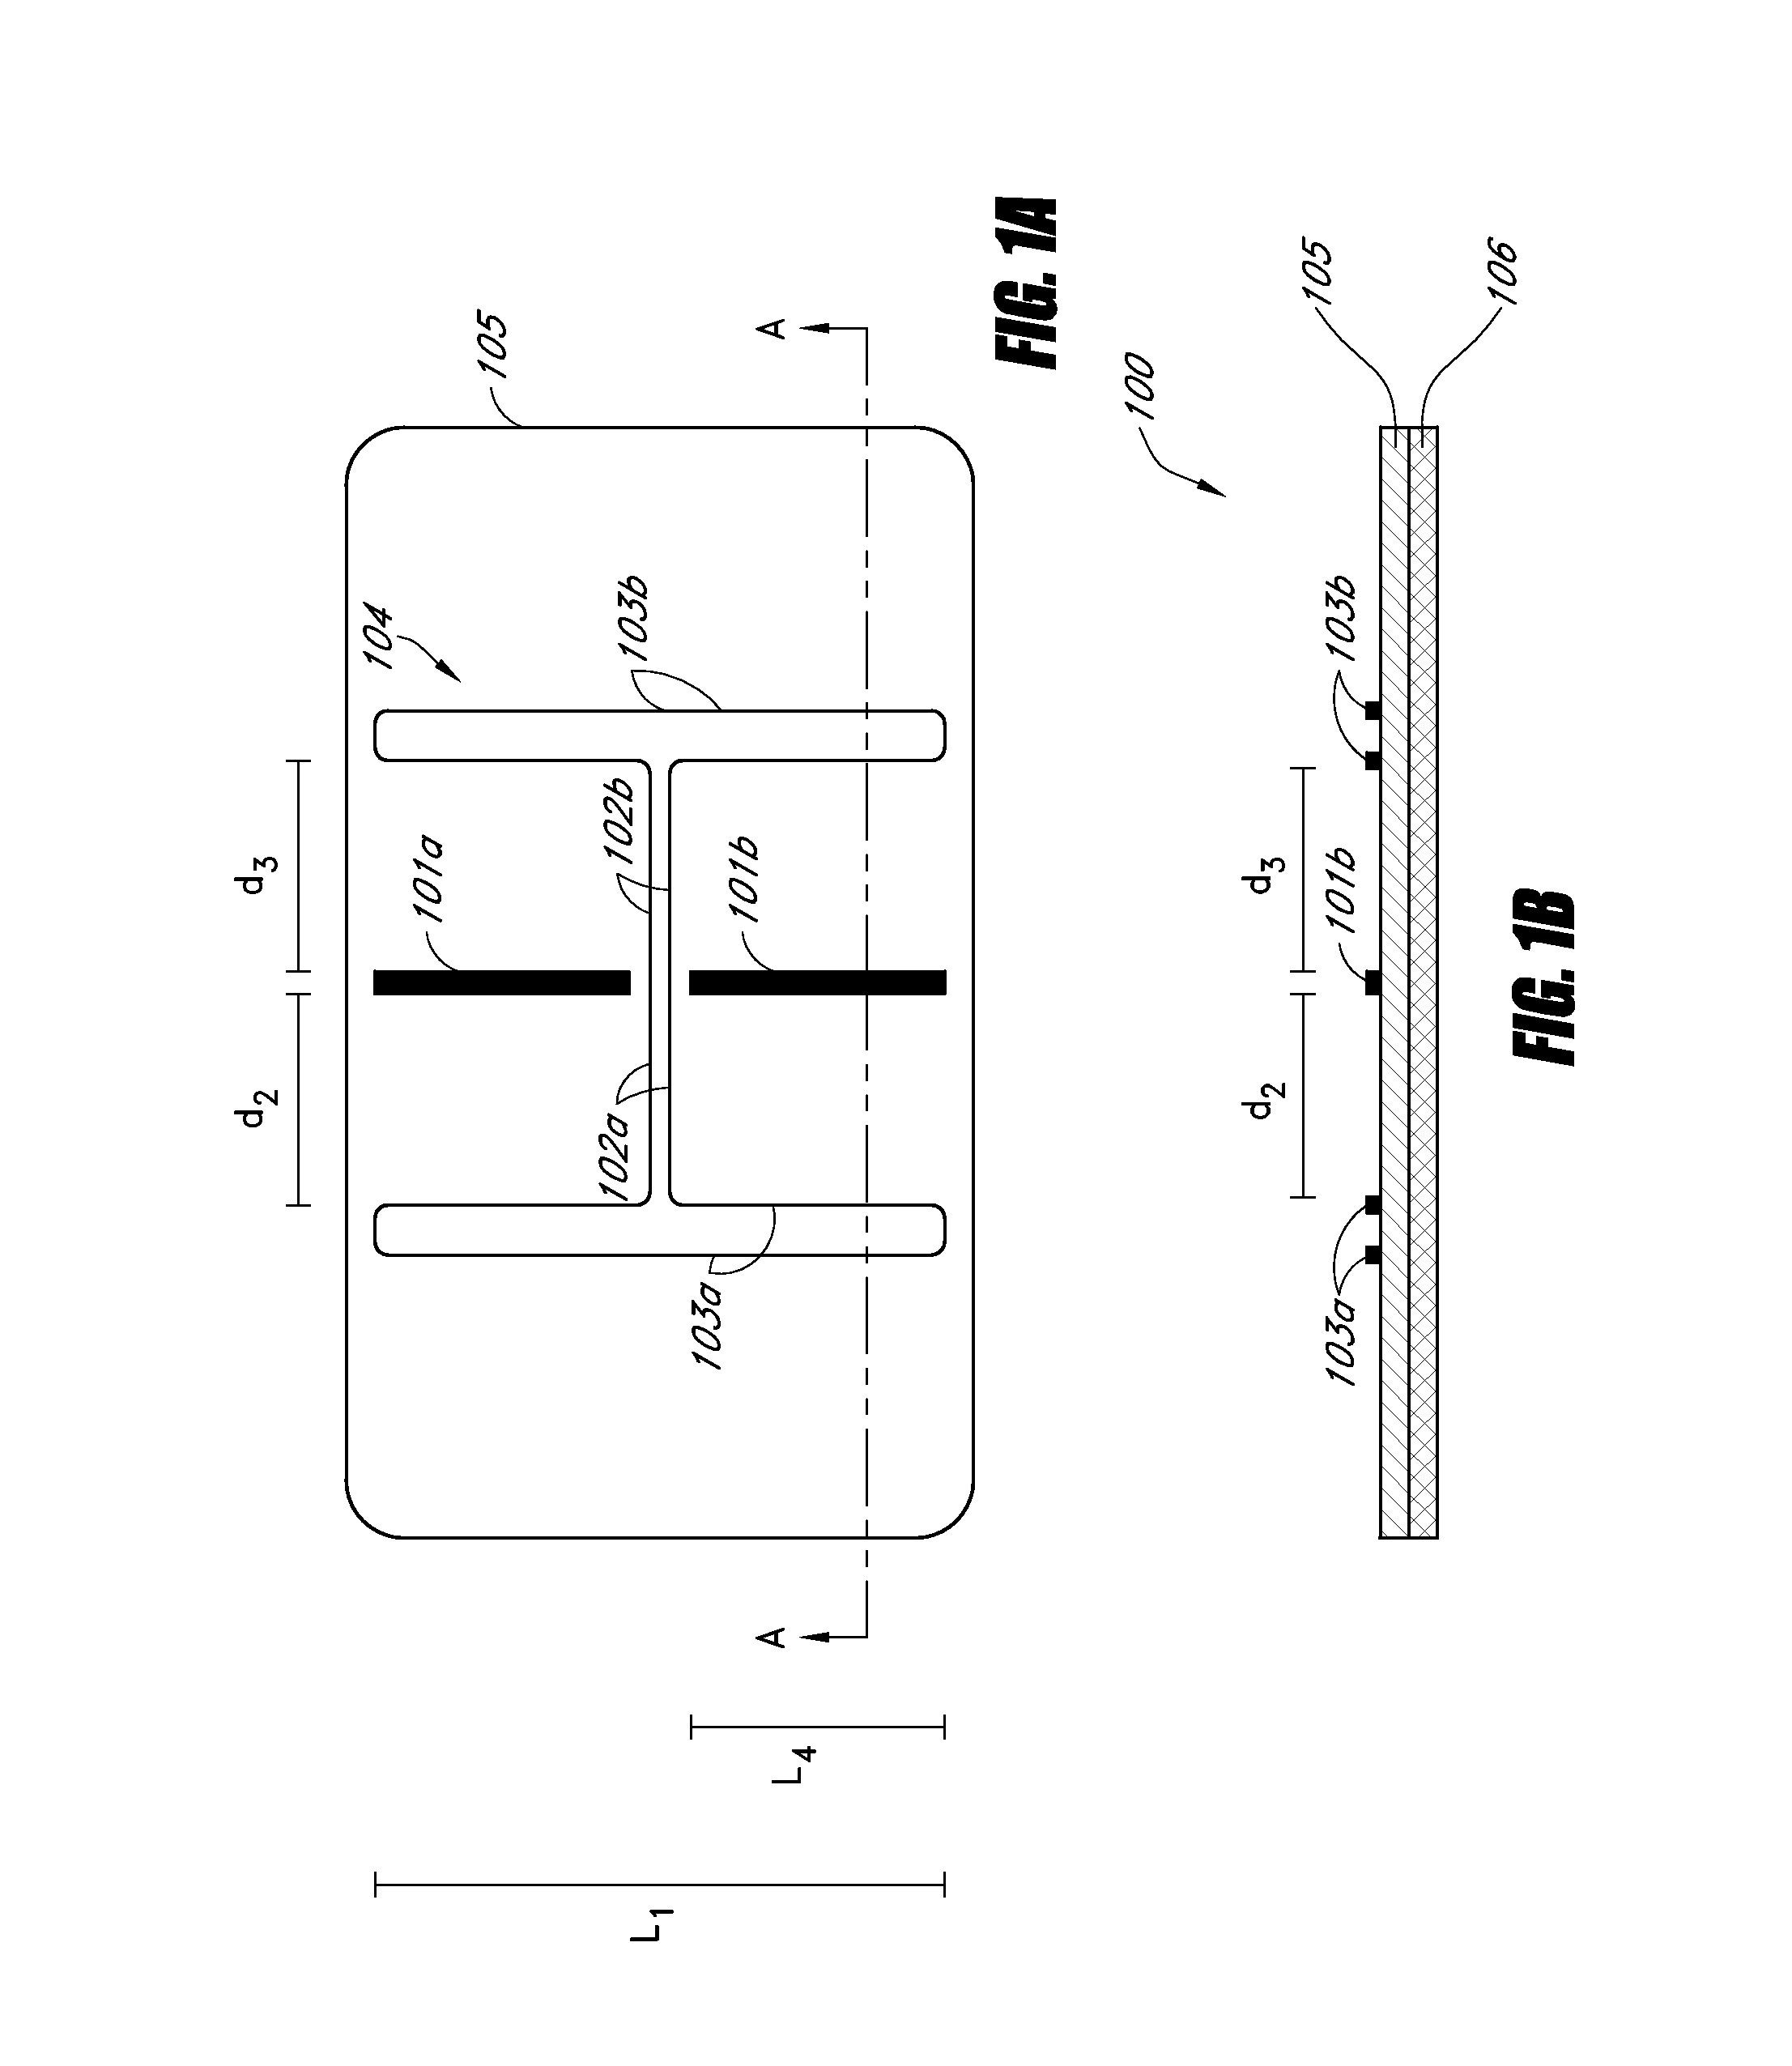 Passive repeater for wireless communications